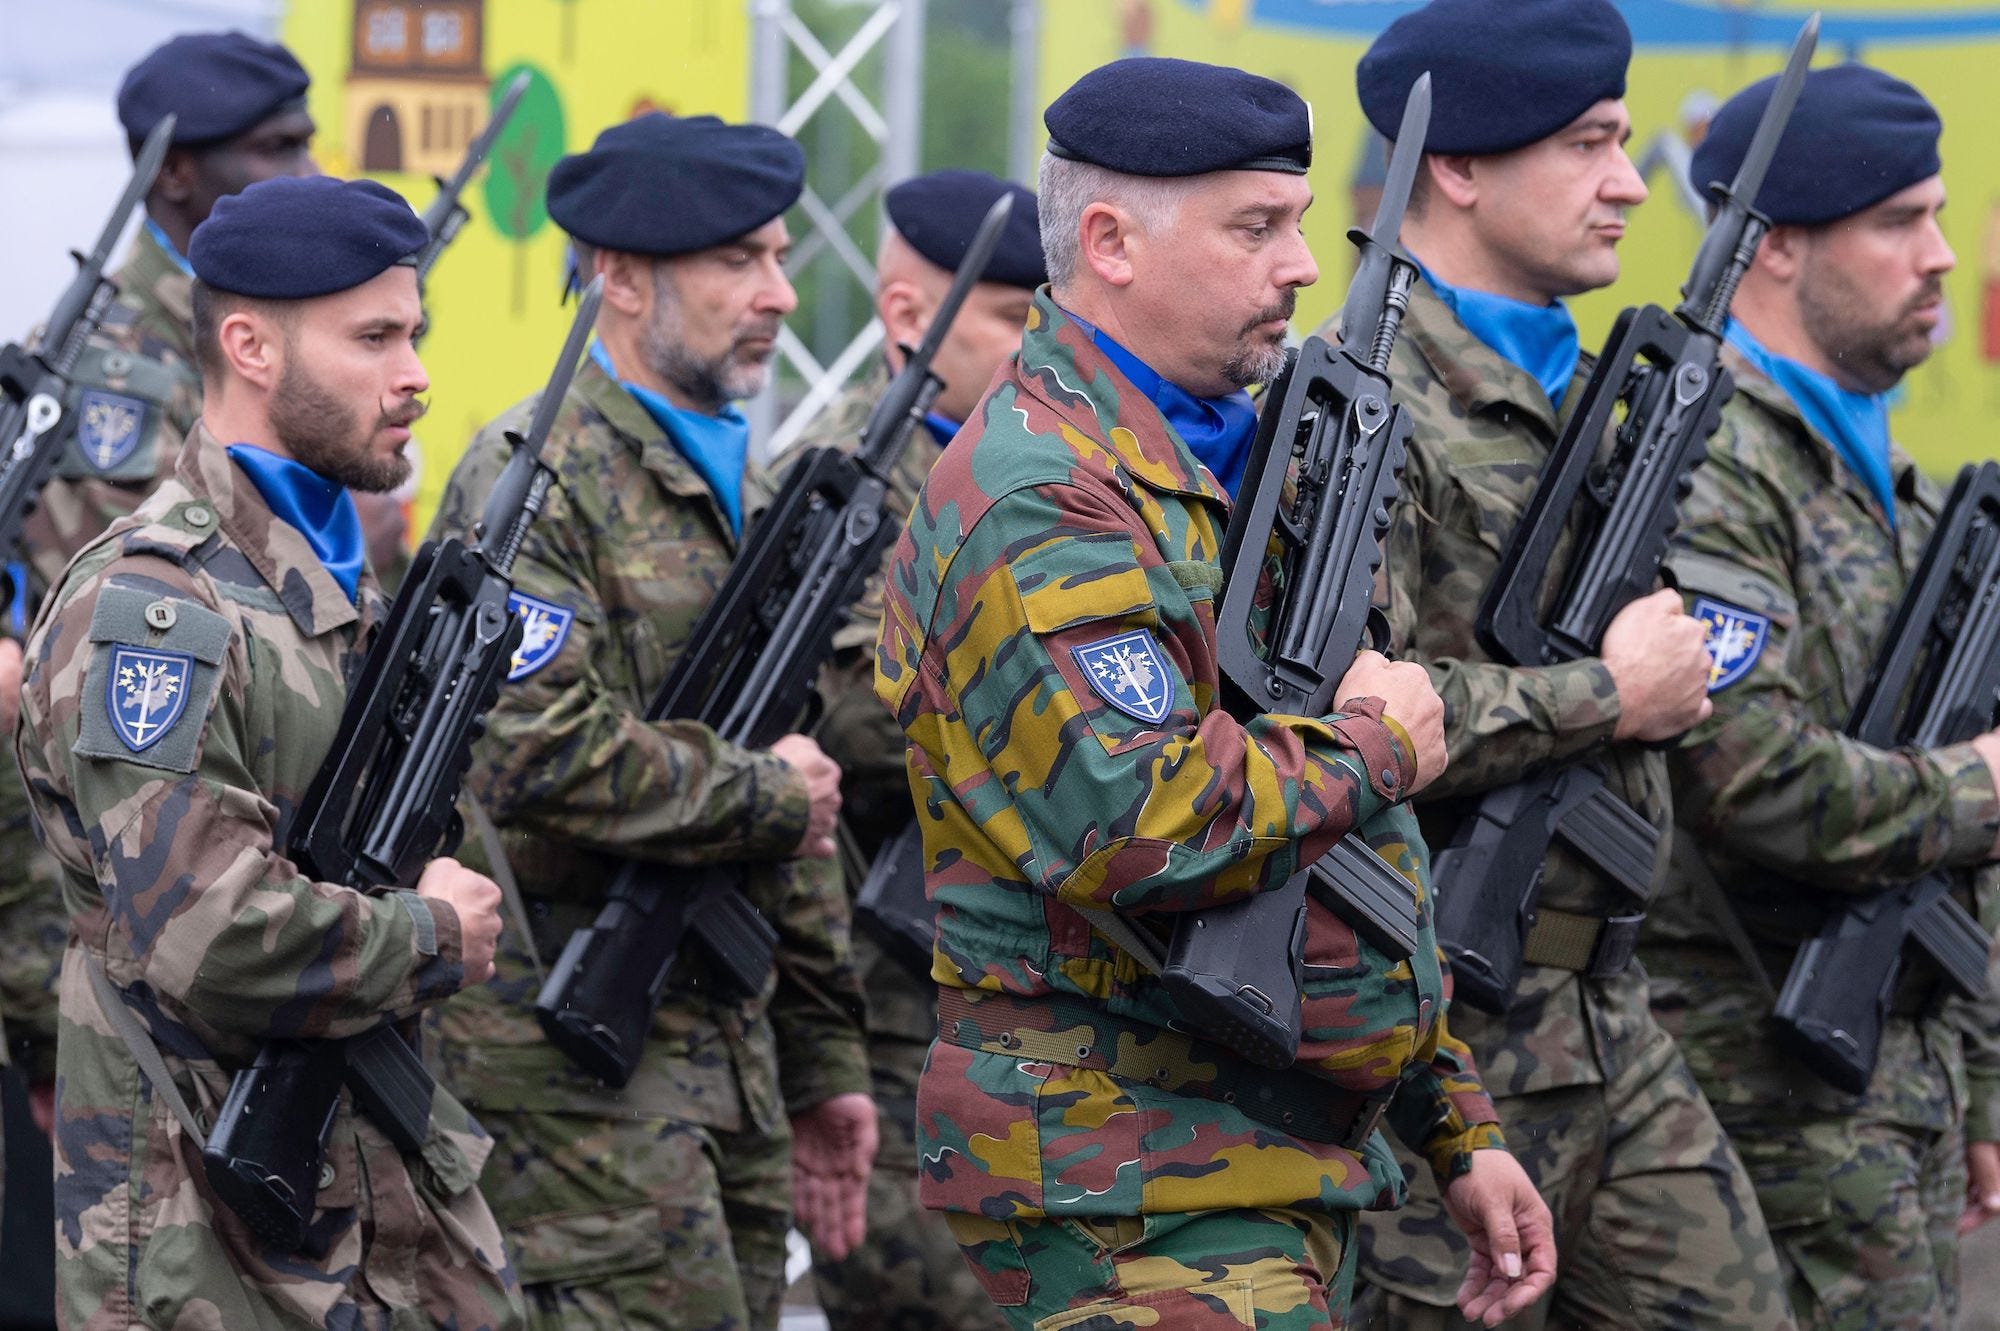 Eurocorps soldiers at European Parliament in Strasbourg